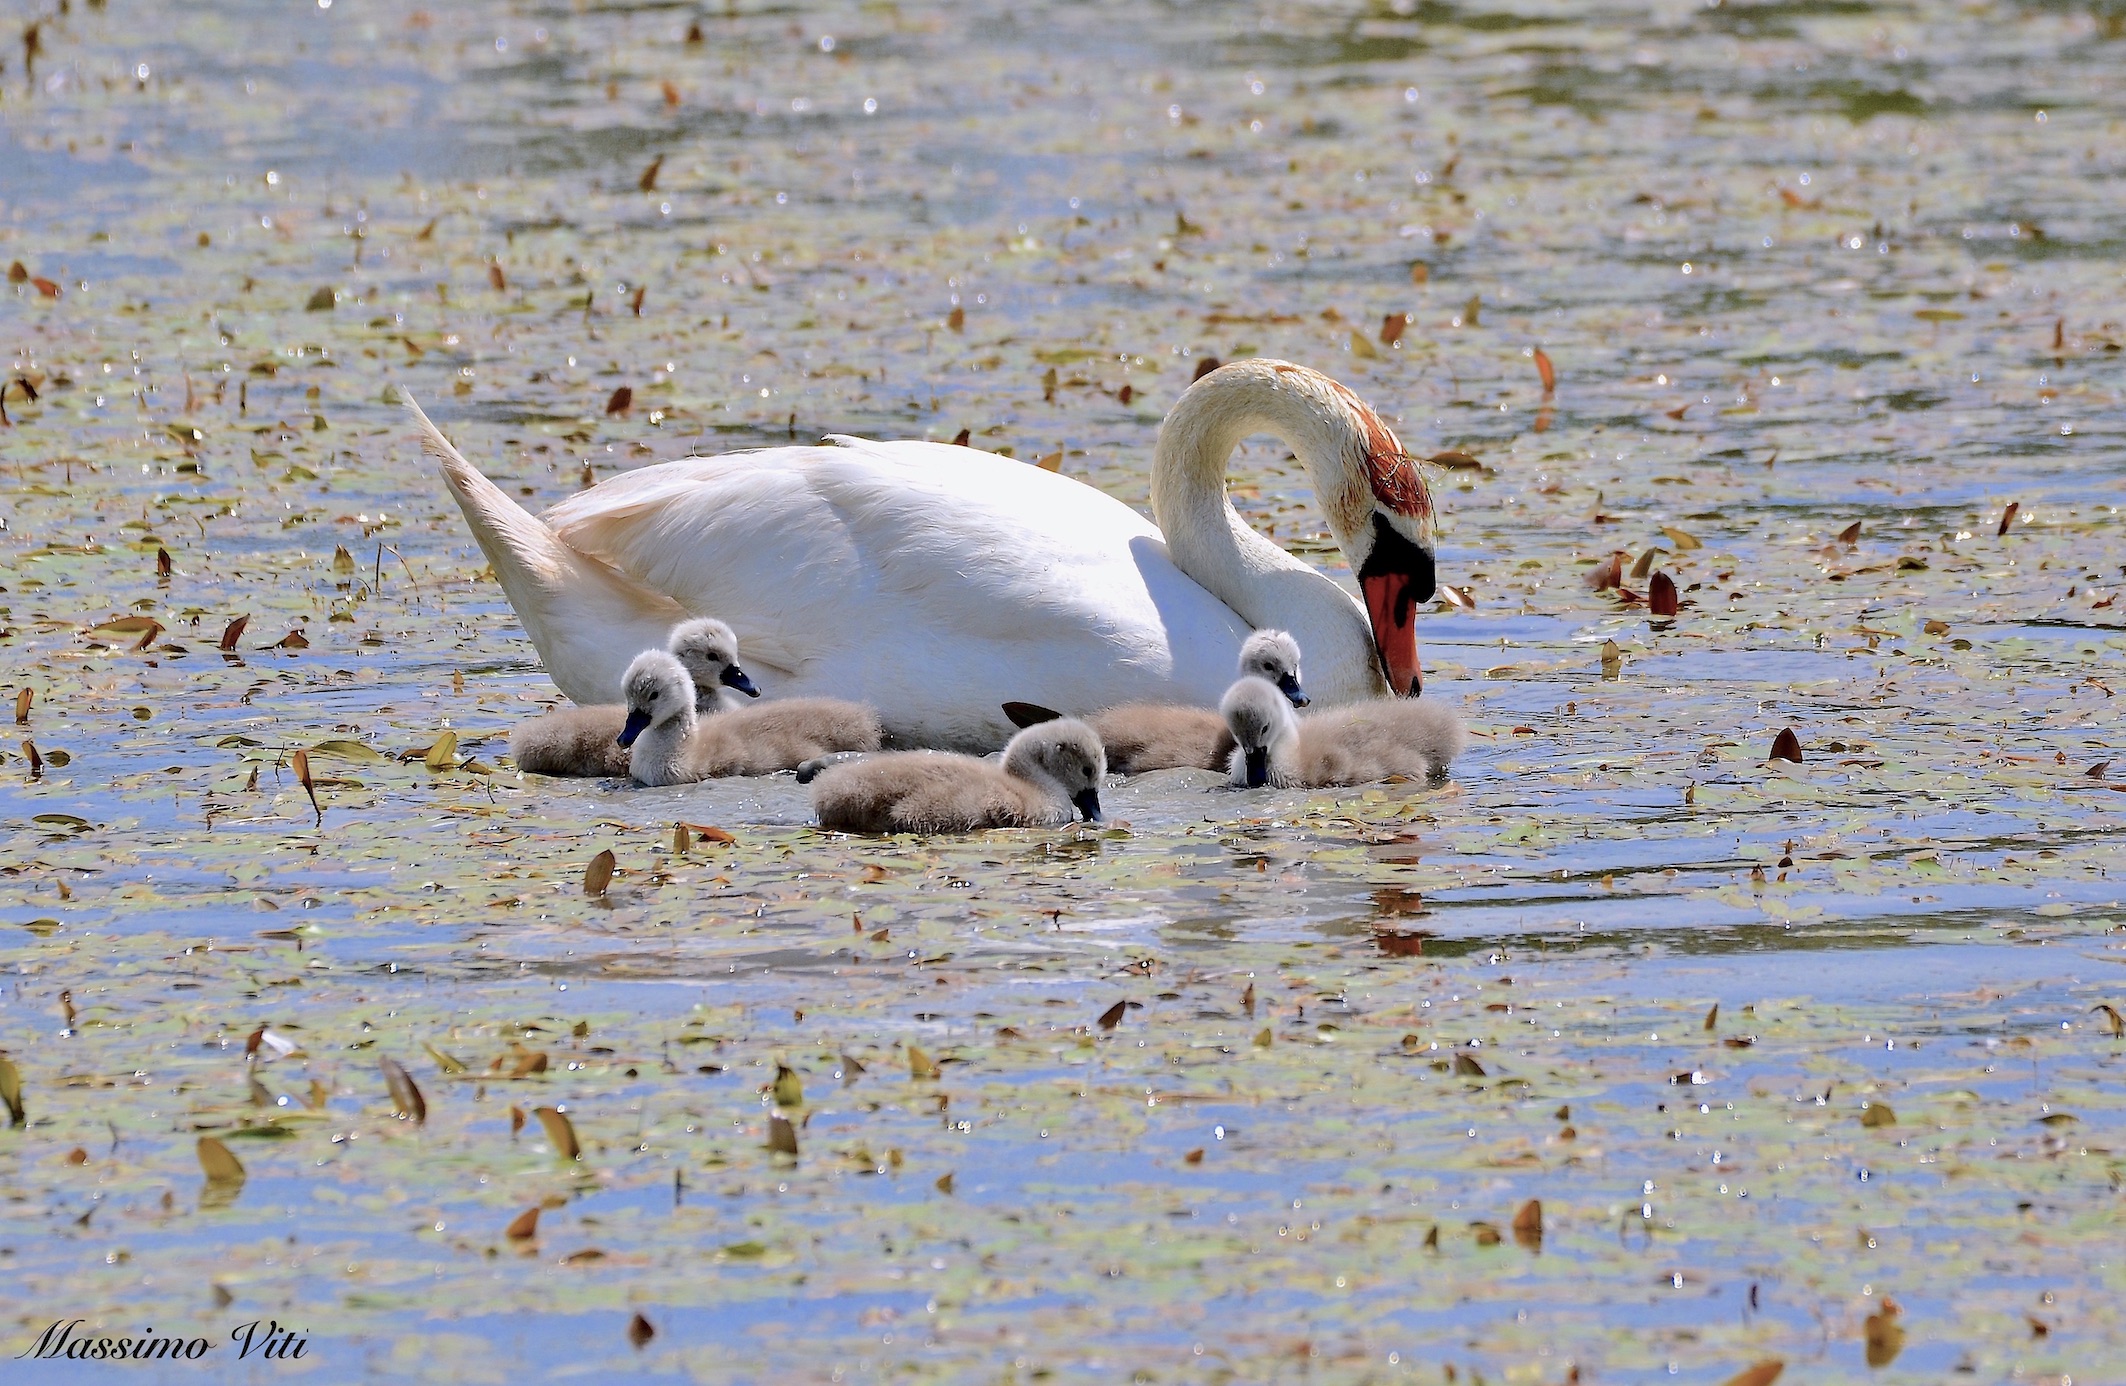 Royal swan with offspring .......